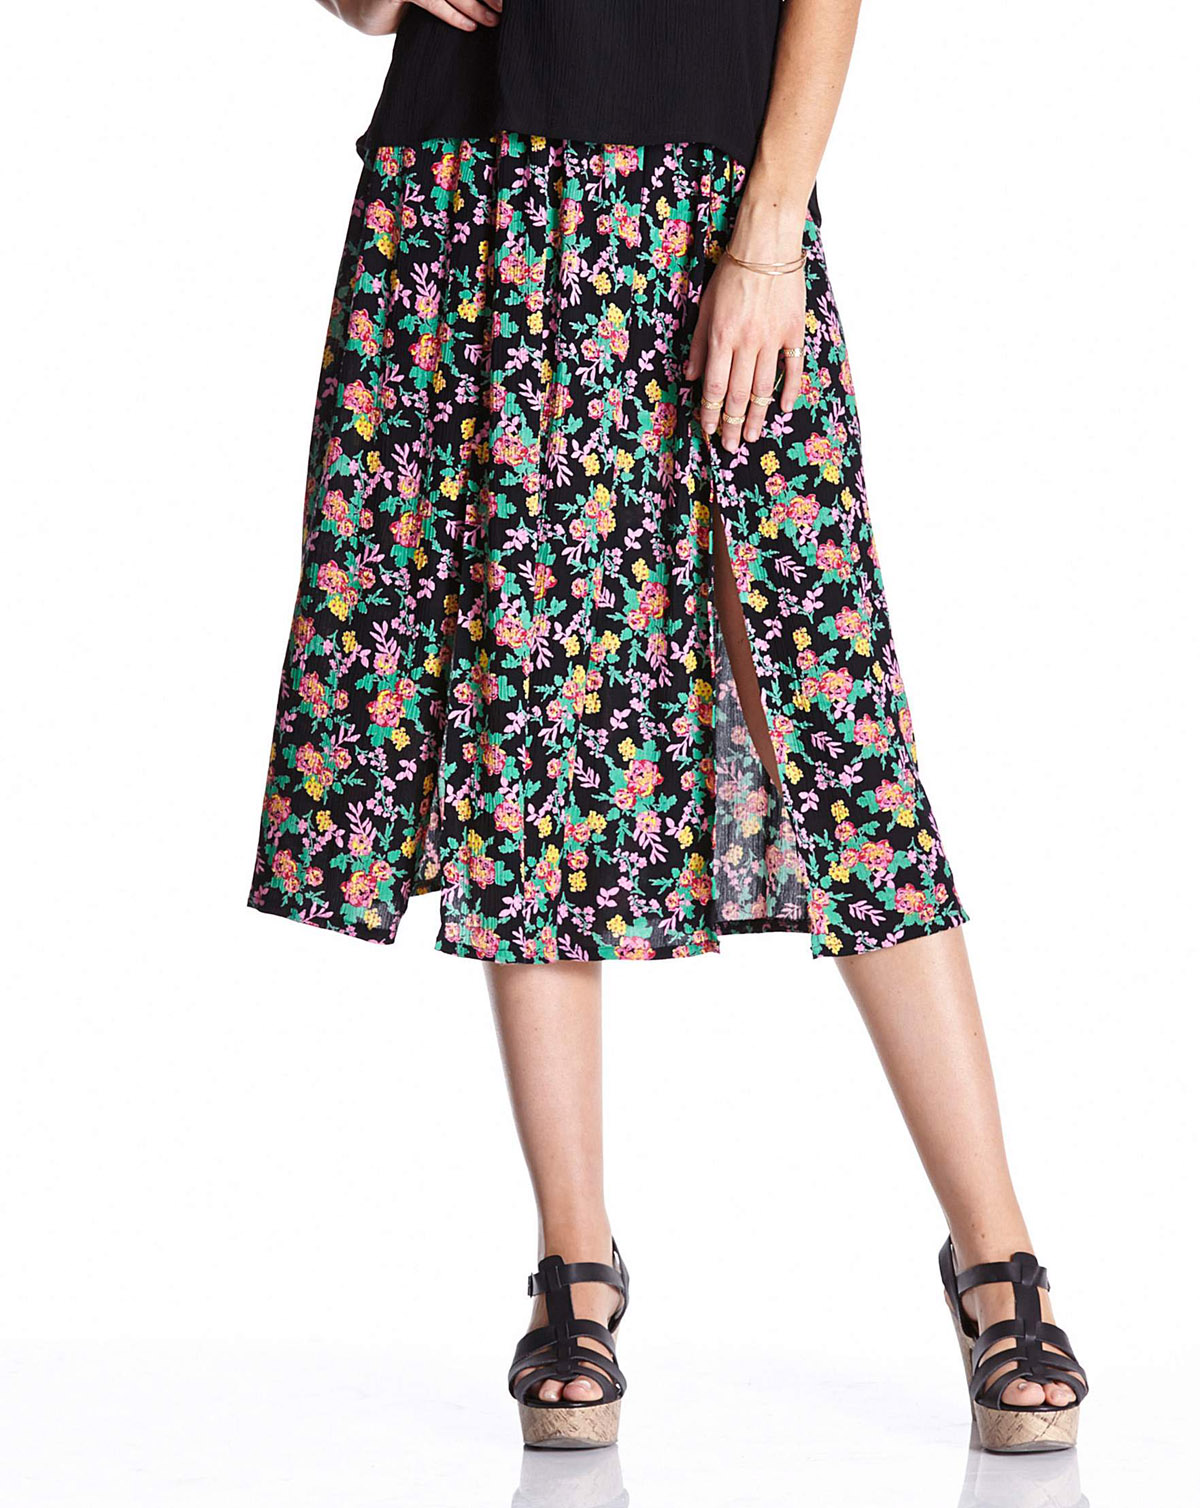 Plus Size wholesale clothing by simply be - - LabelBe BLACK Floral ...